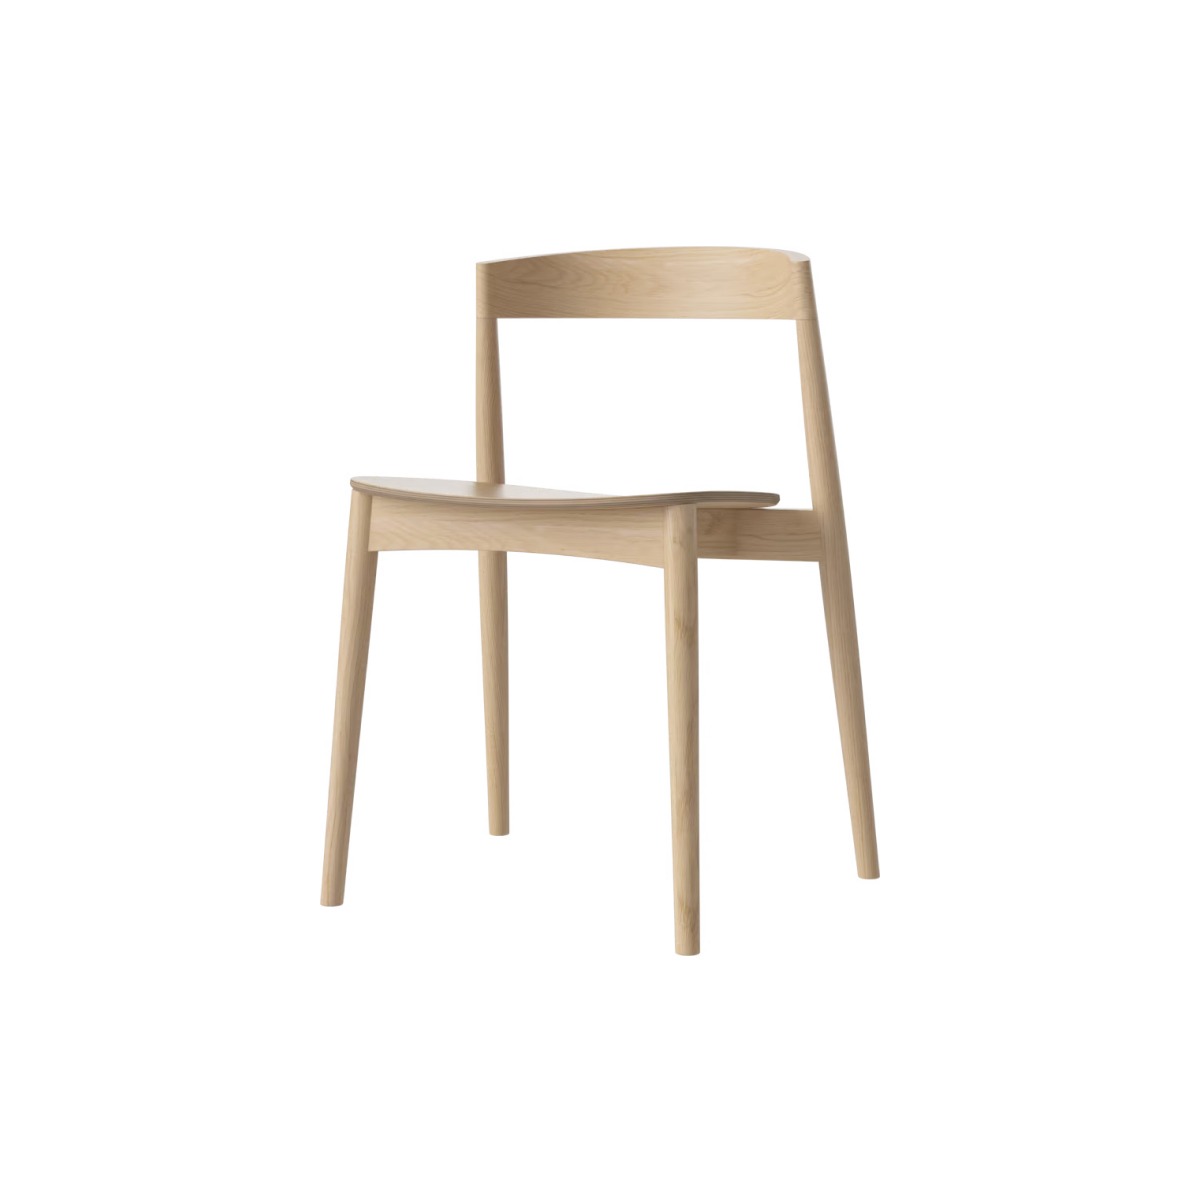 BOLIA Kite Dining Chair -3 Colors